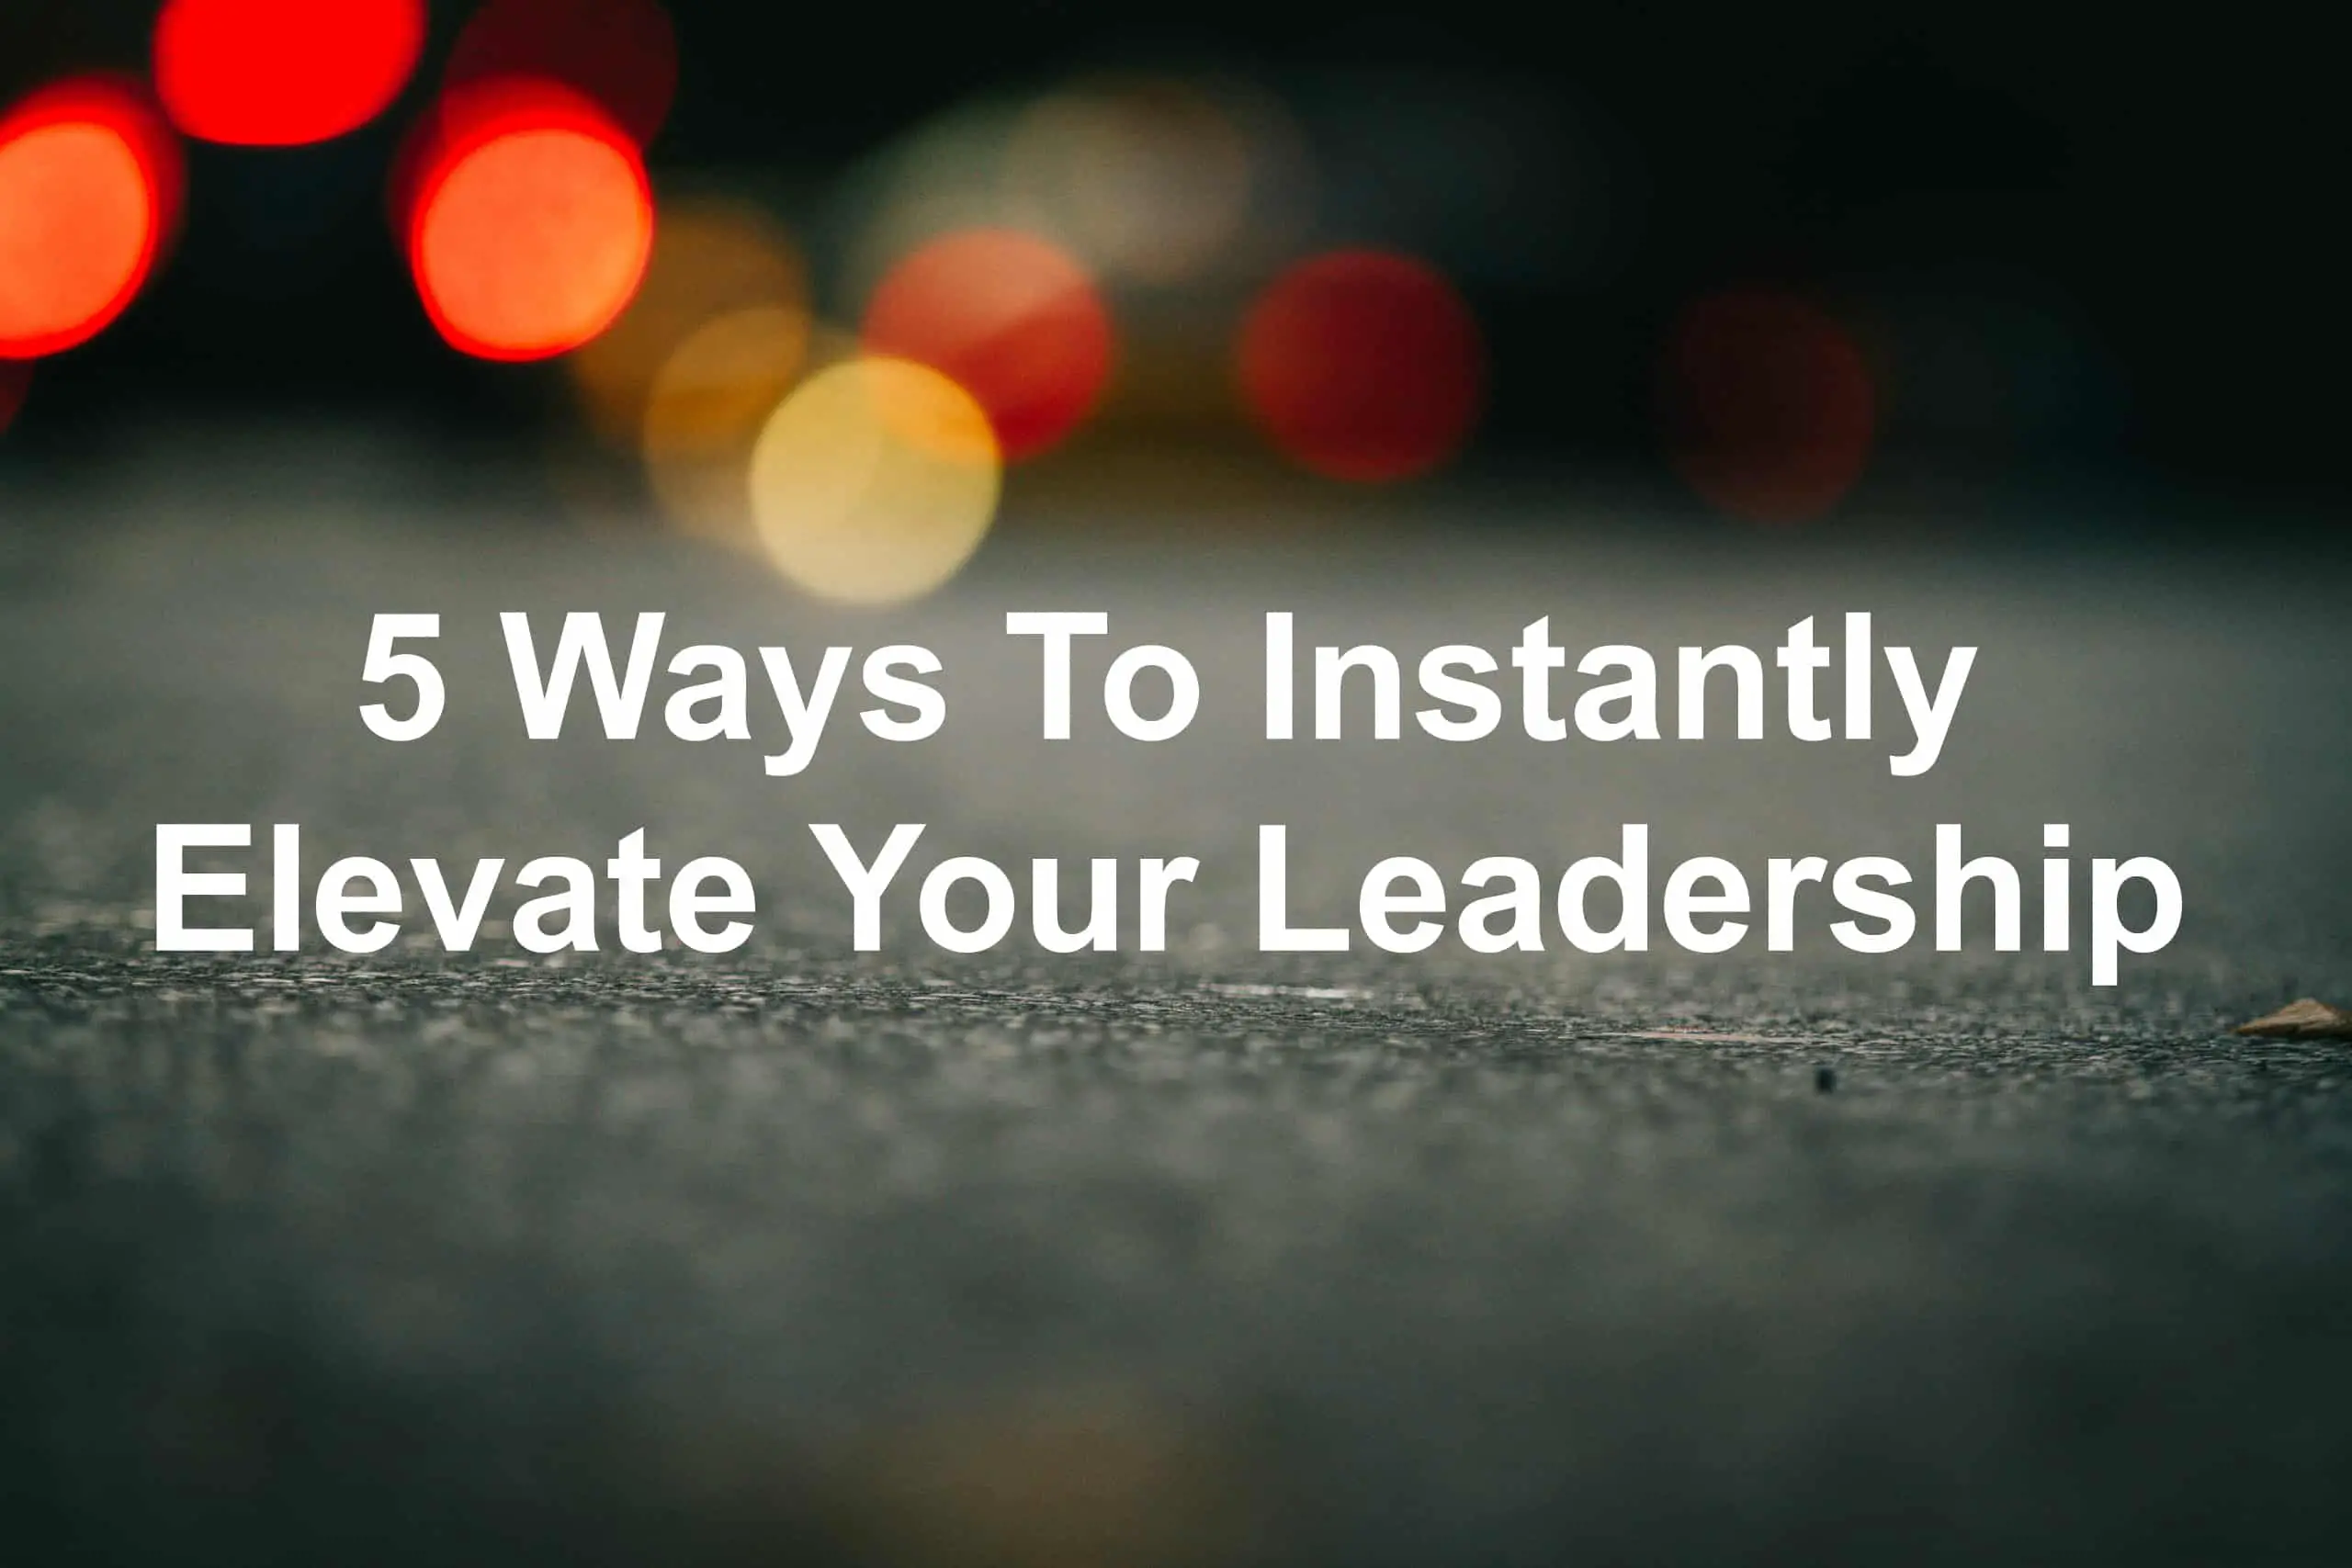 Discover how to instantly elevate your leadership